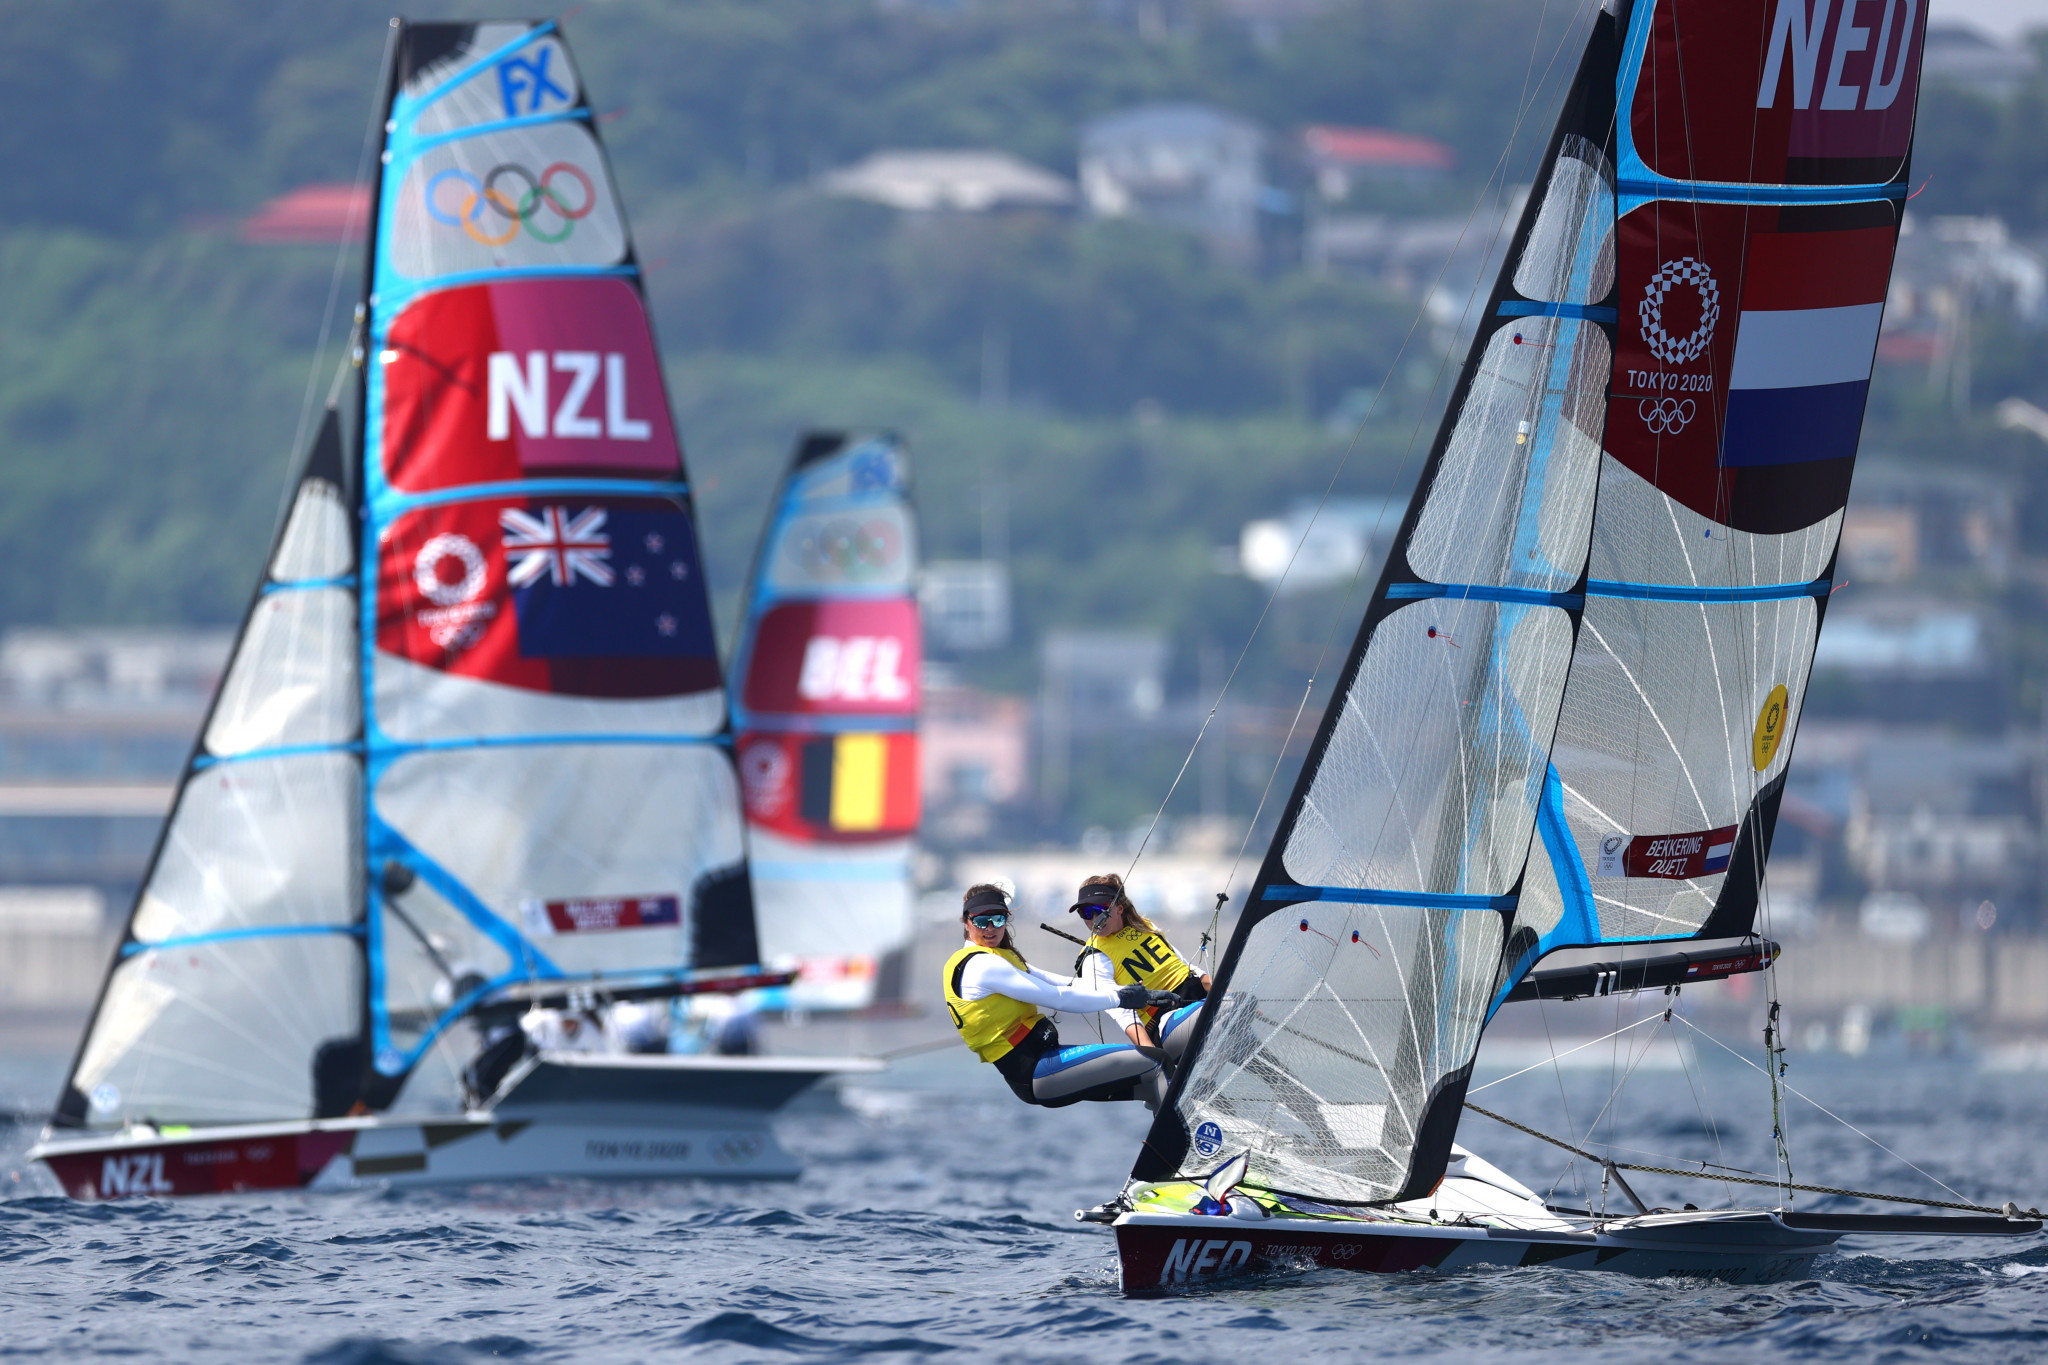 Staniul and Sztorch win 49er title after close contest at European Championships